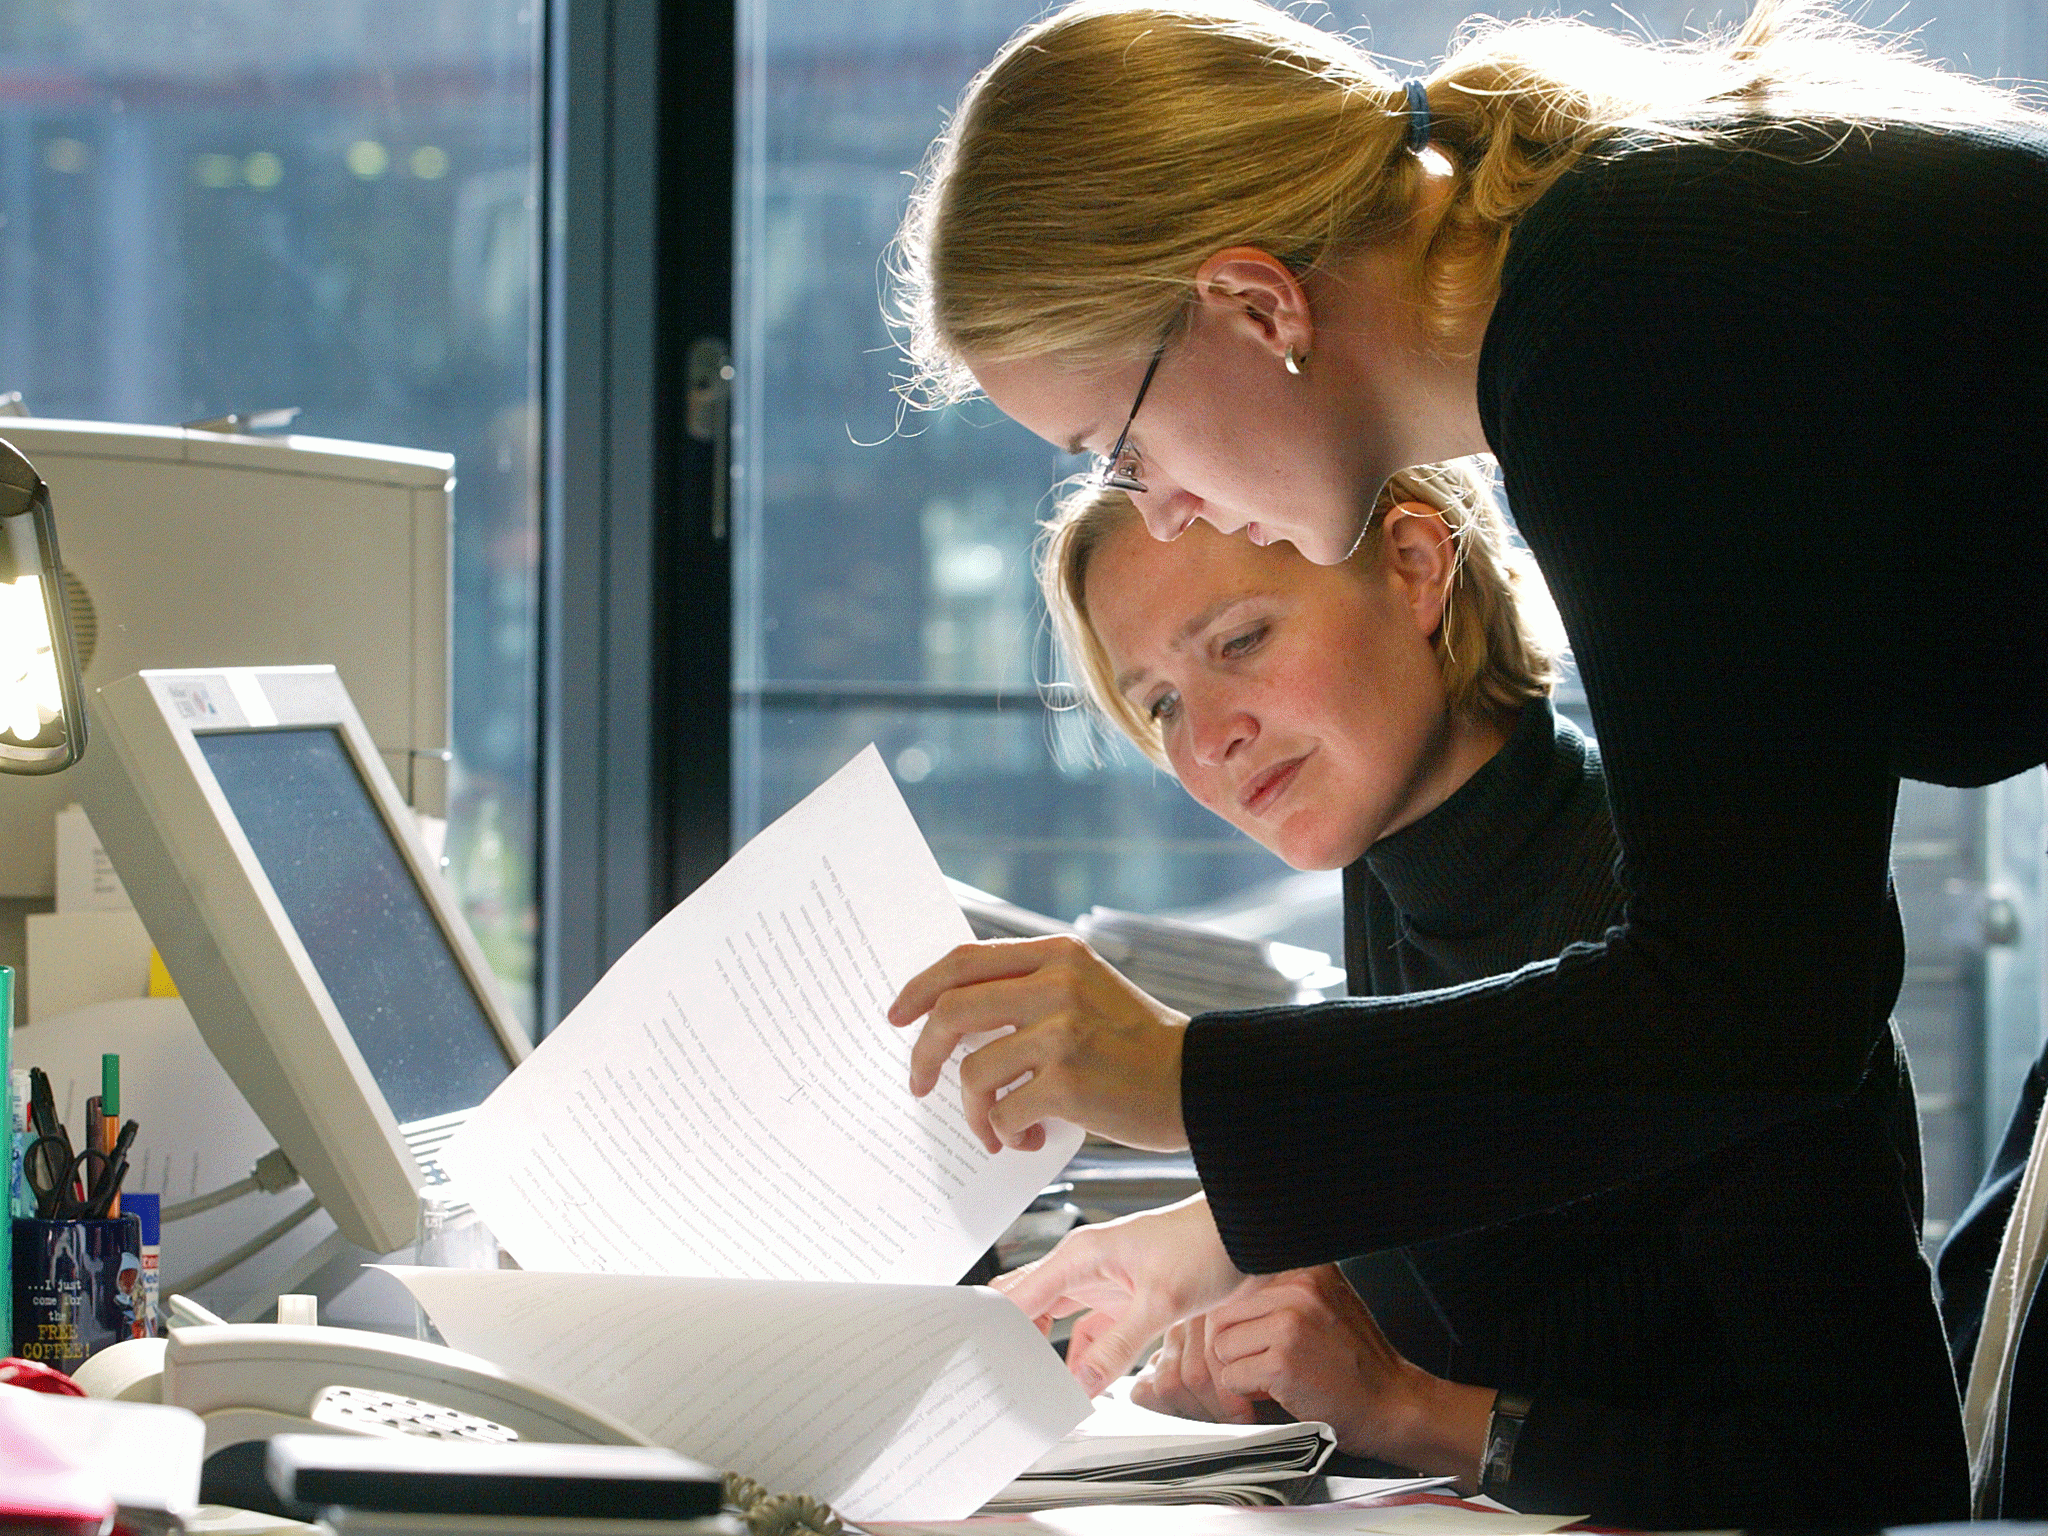 The national pay gap is a little more than 18 per cent, according to Government statistics